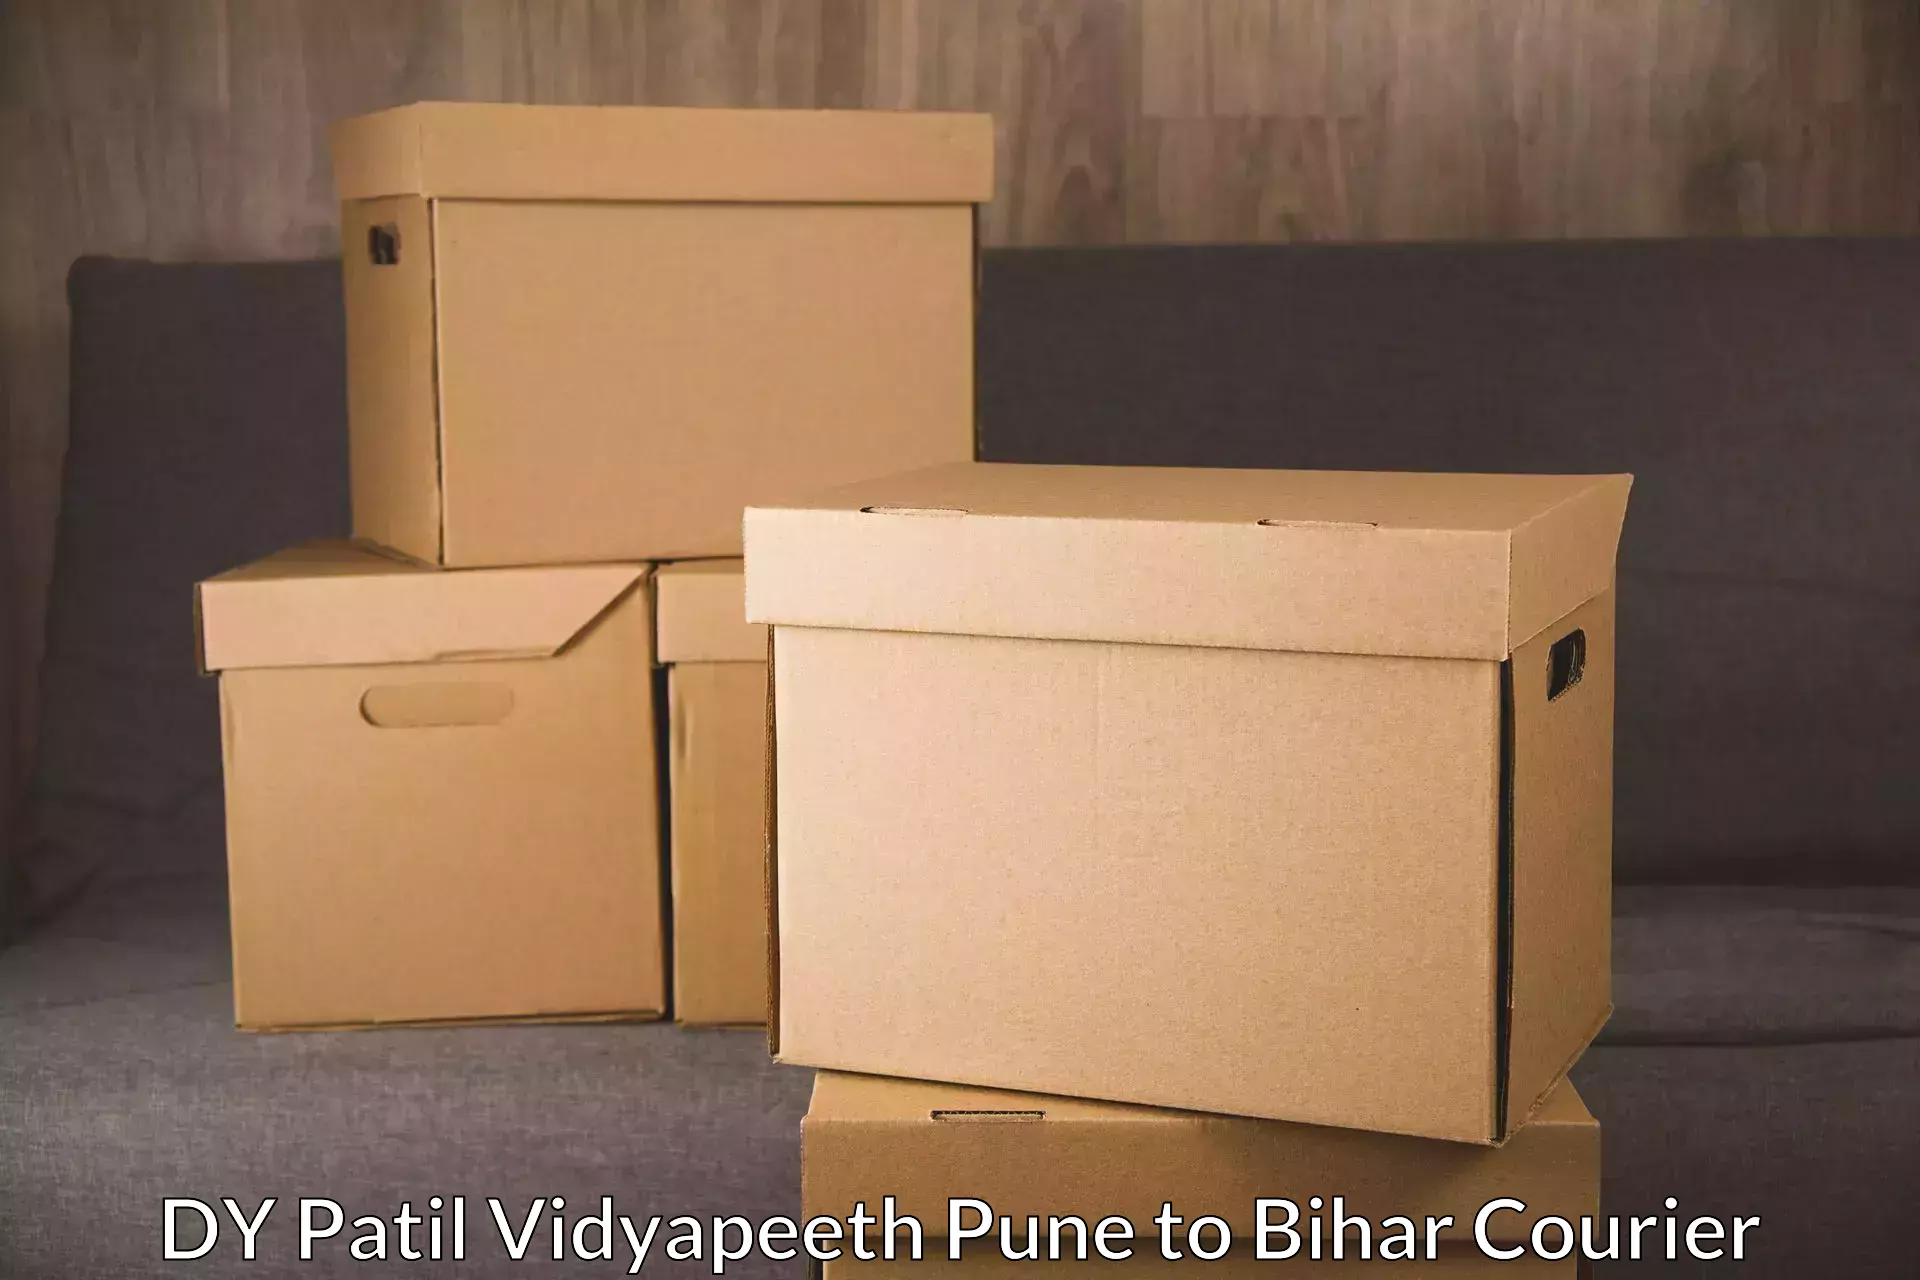 Business logistics support DY Patil Vidyapeeth Pune to Sangrampur